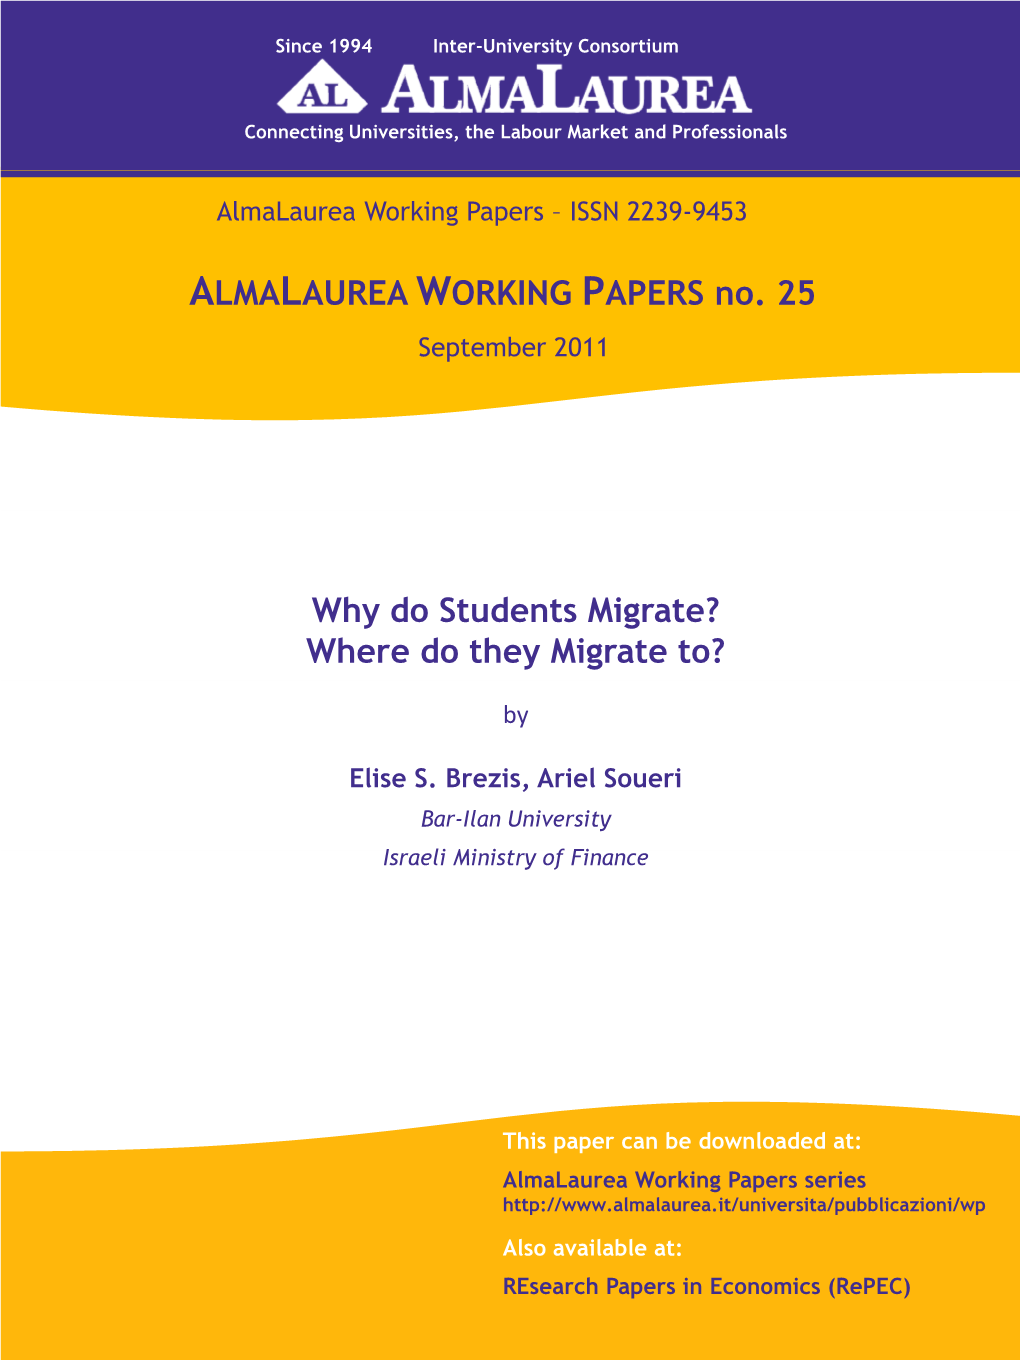 ALMALAUREA WORKING PAPERS No. 25 Why Do Students Migrate?